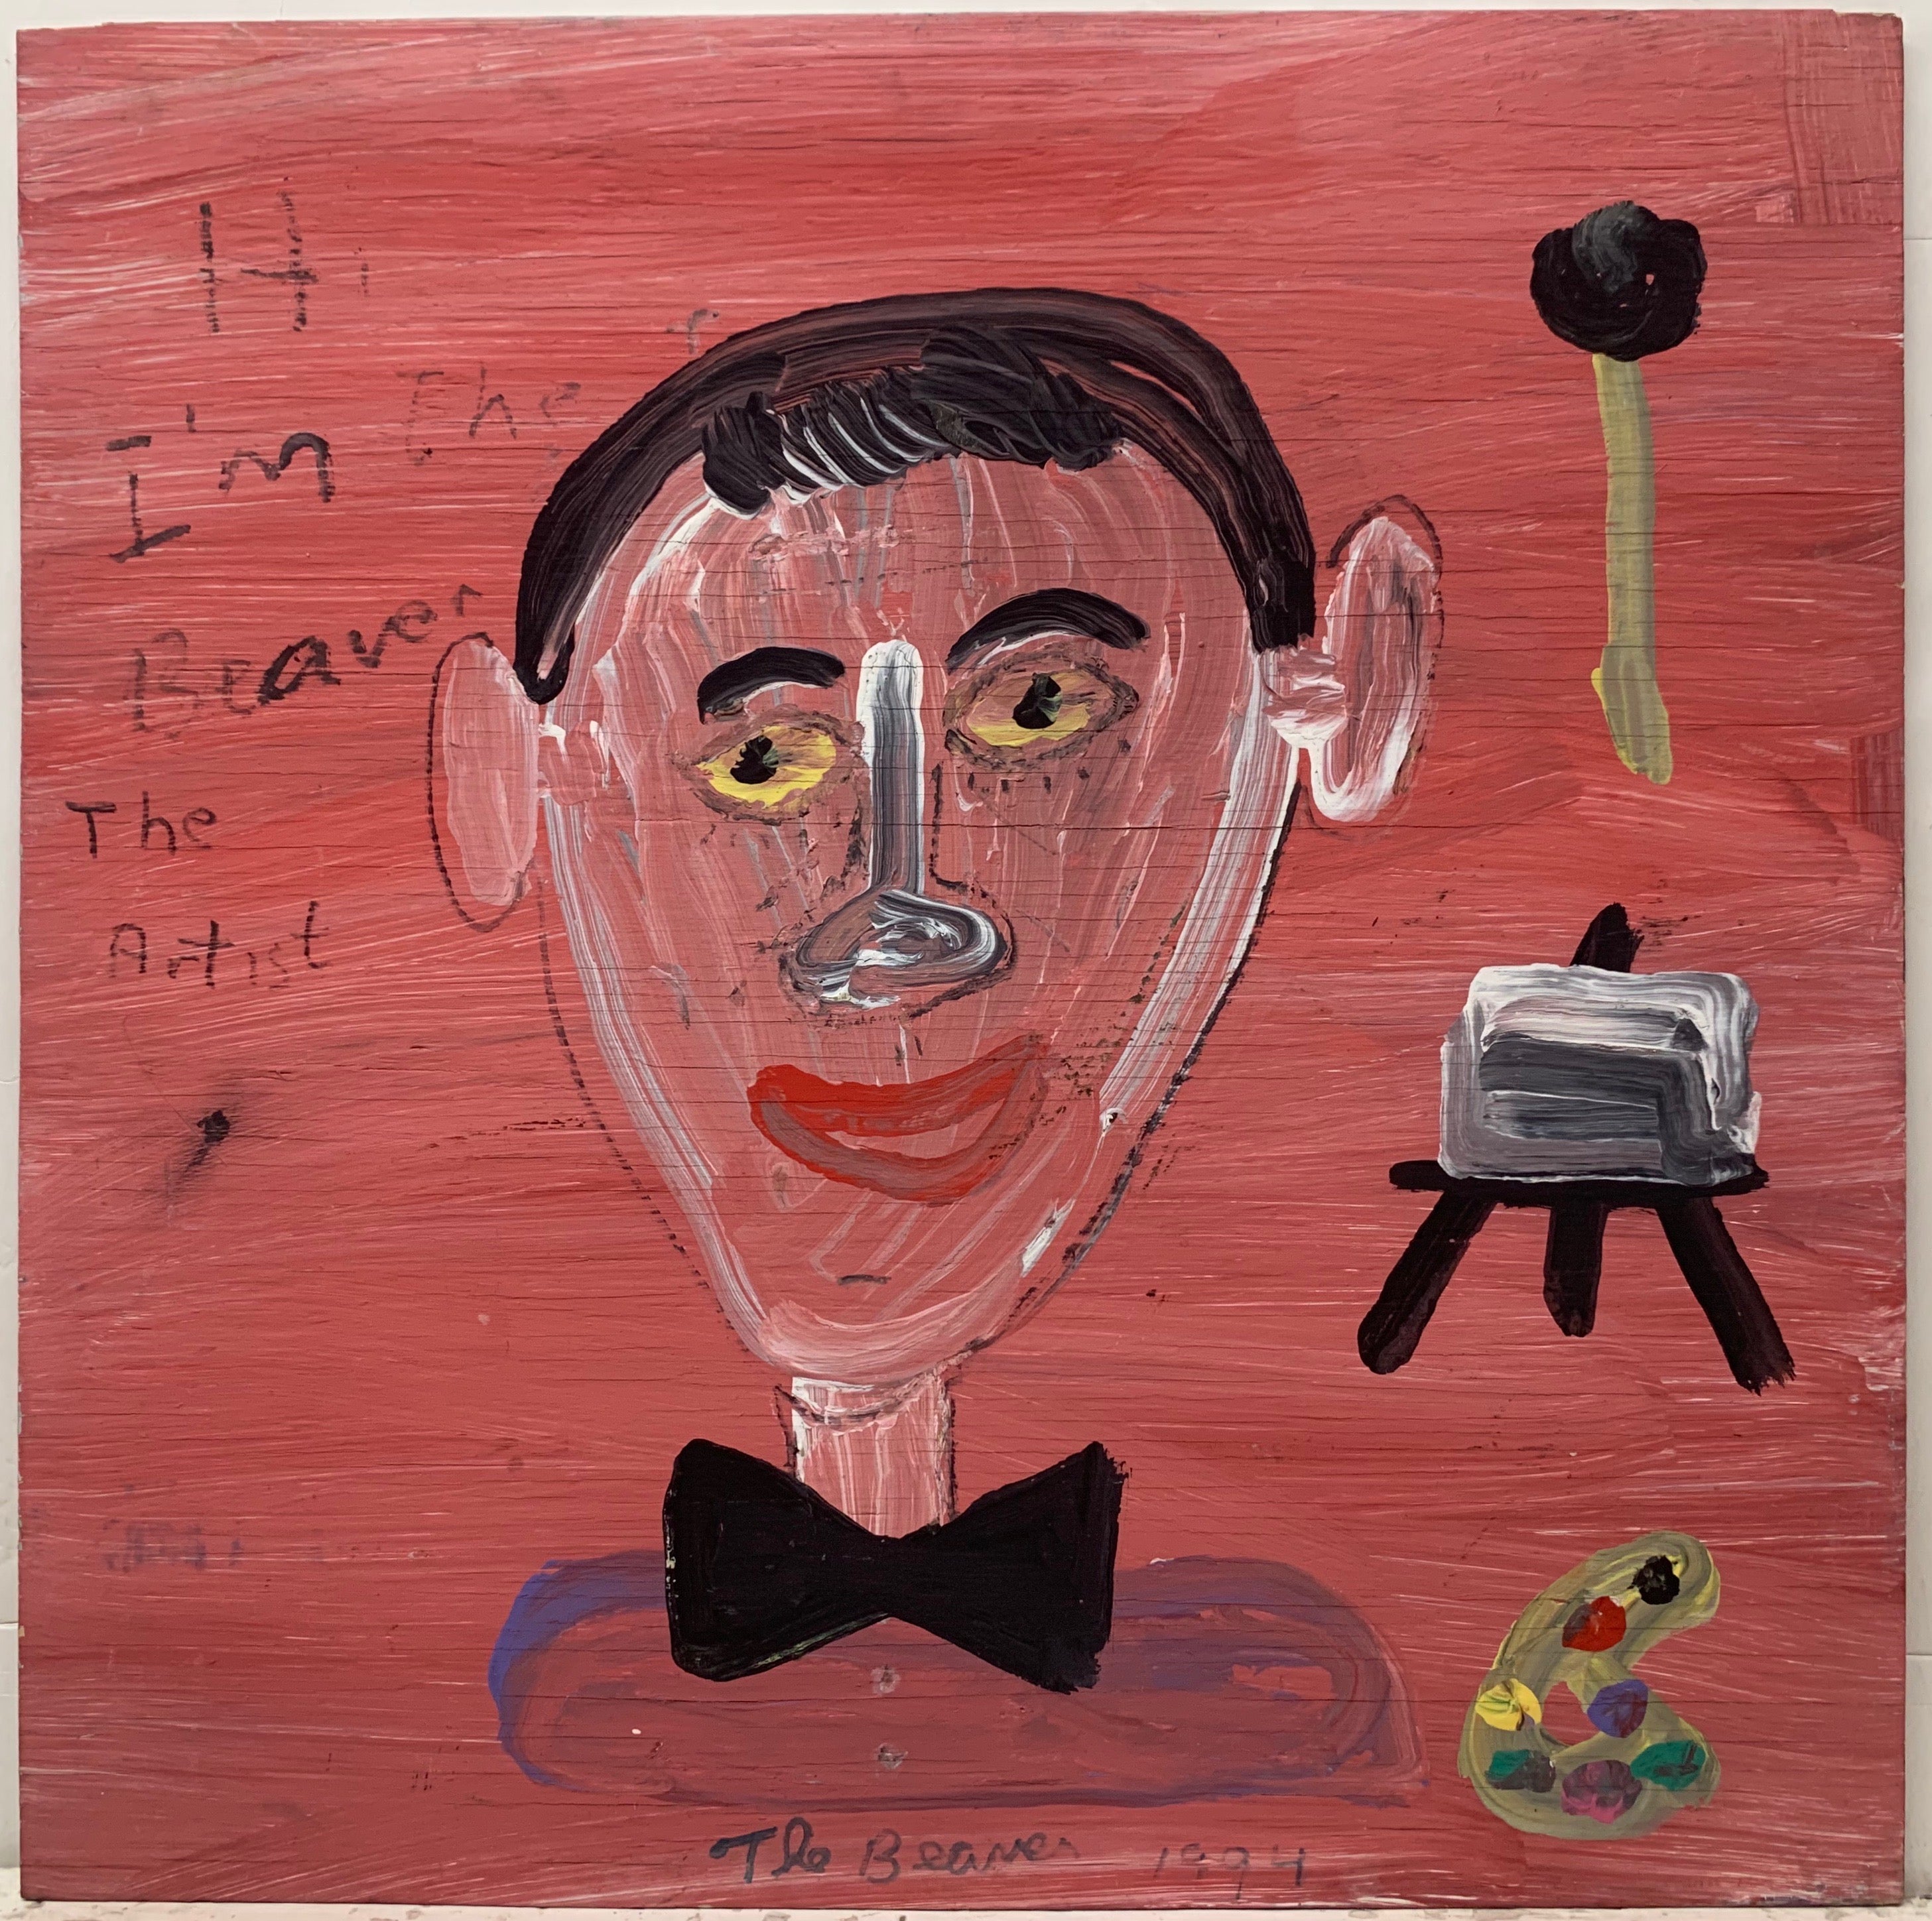 A self-portrait by the Beaver wearing a bowtie and with an easel and palette. 